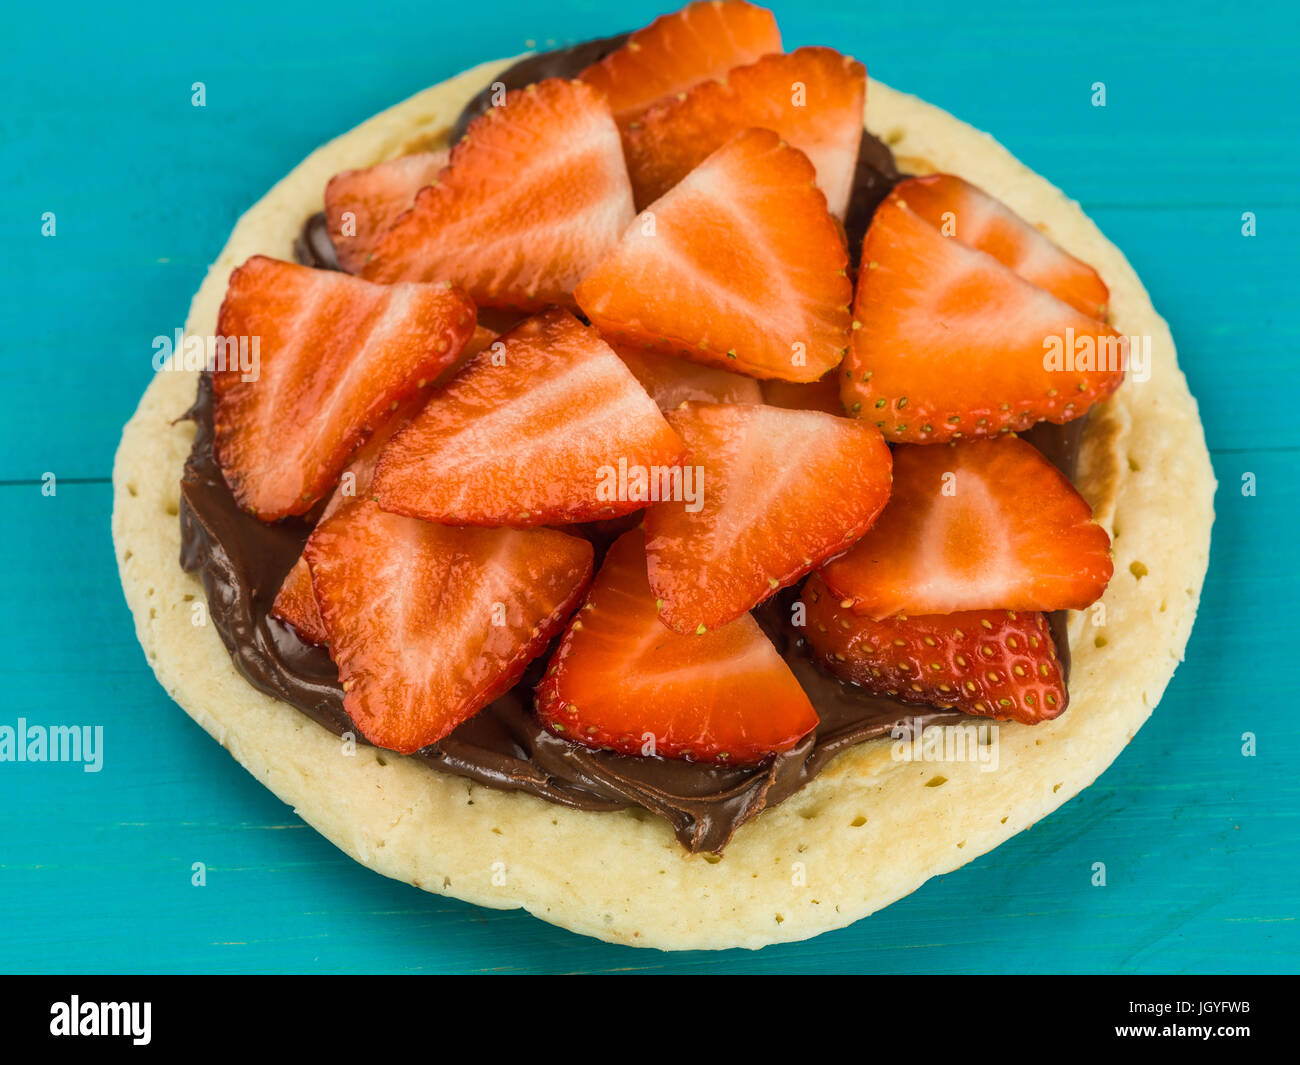 Pancake With Strawberries and Chocolate Spread Against A Blue Background Stock Photo